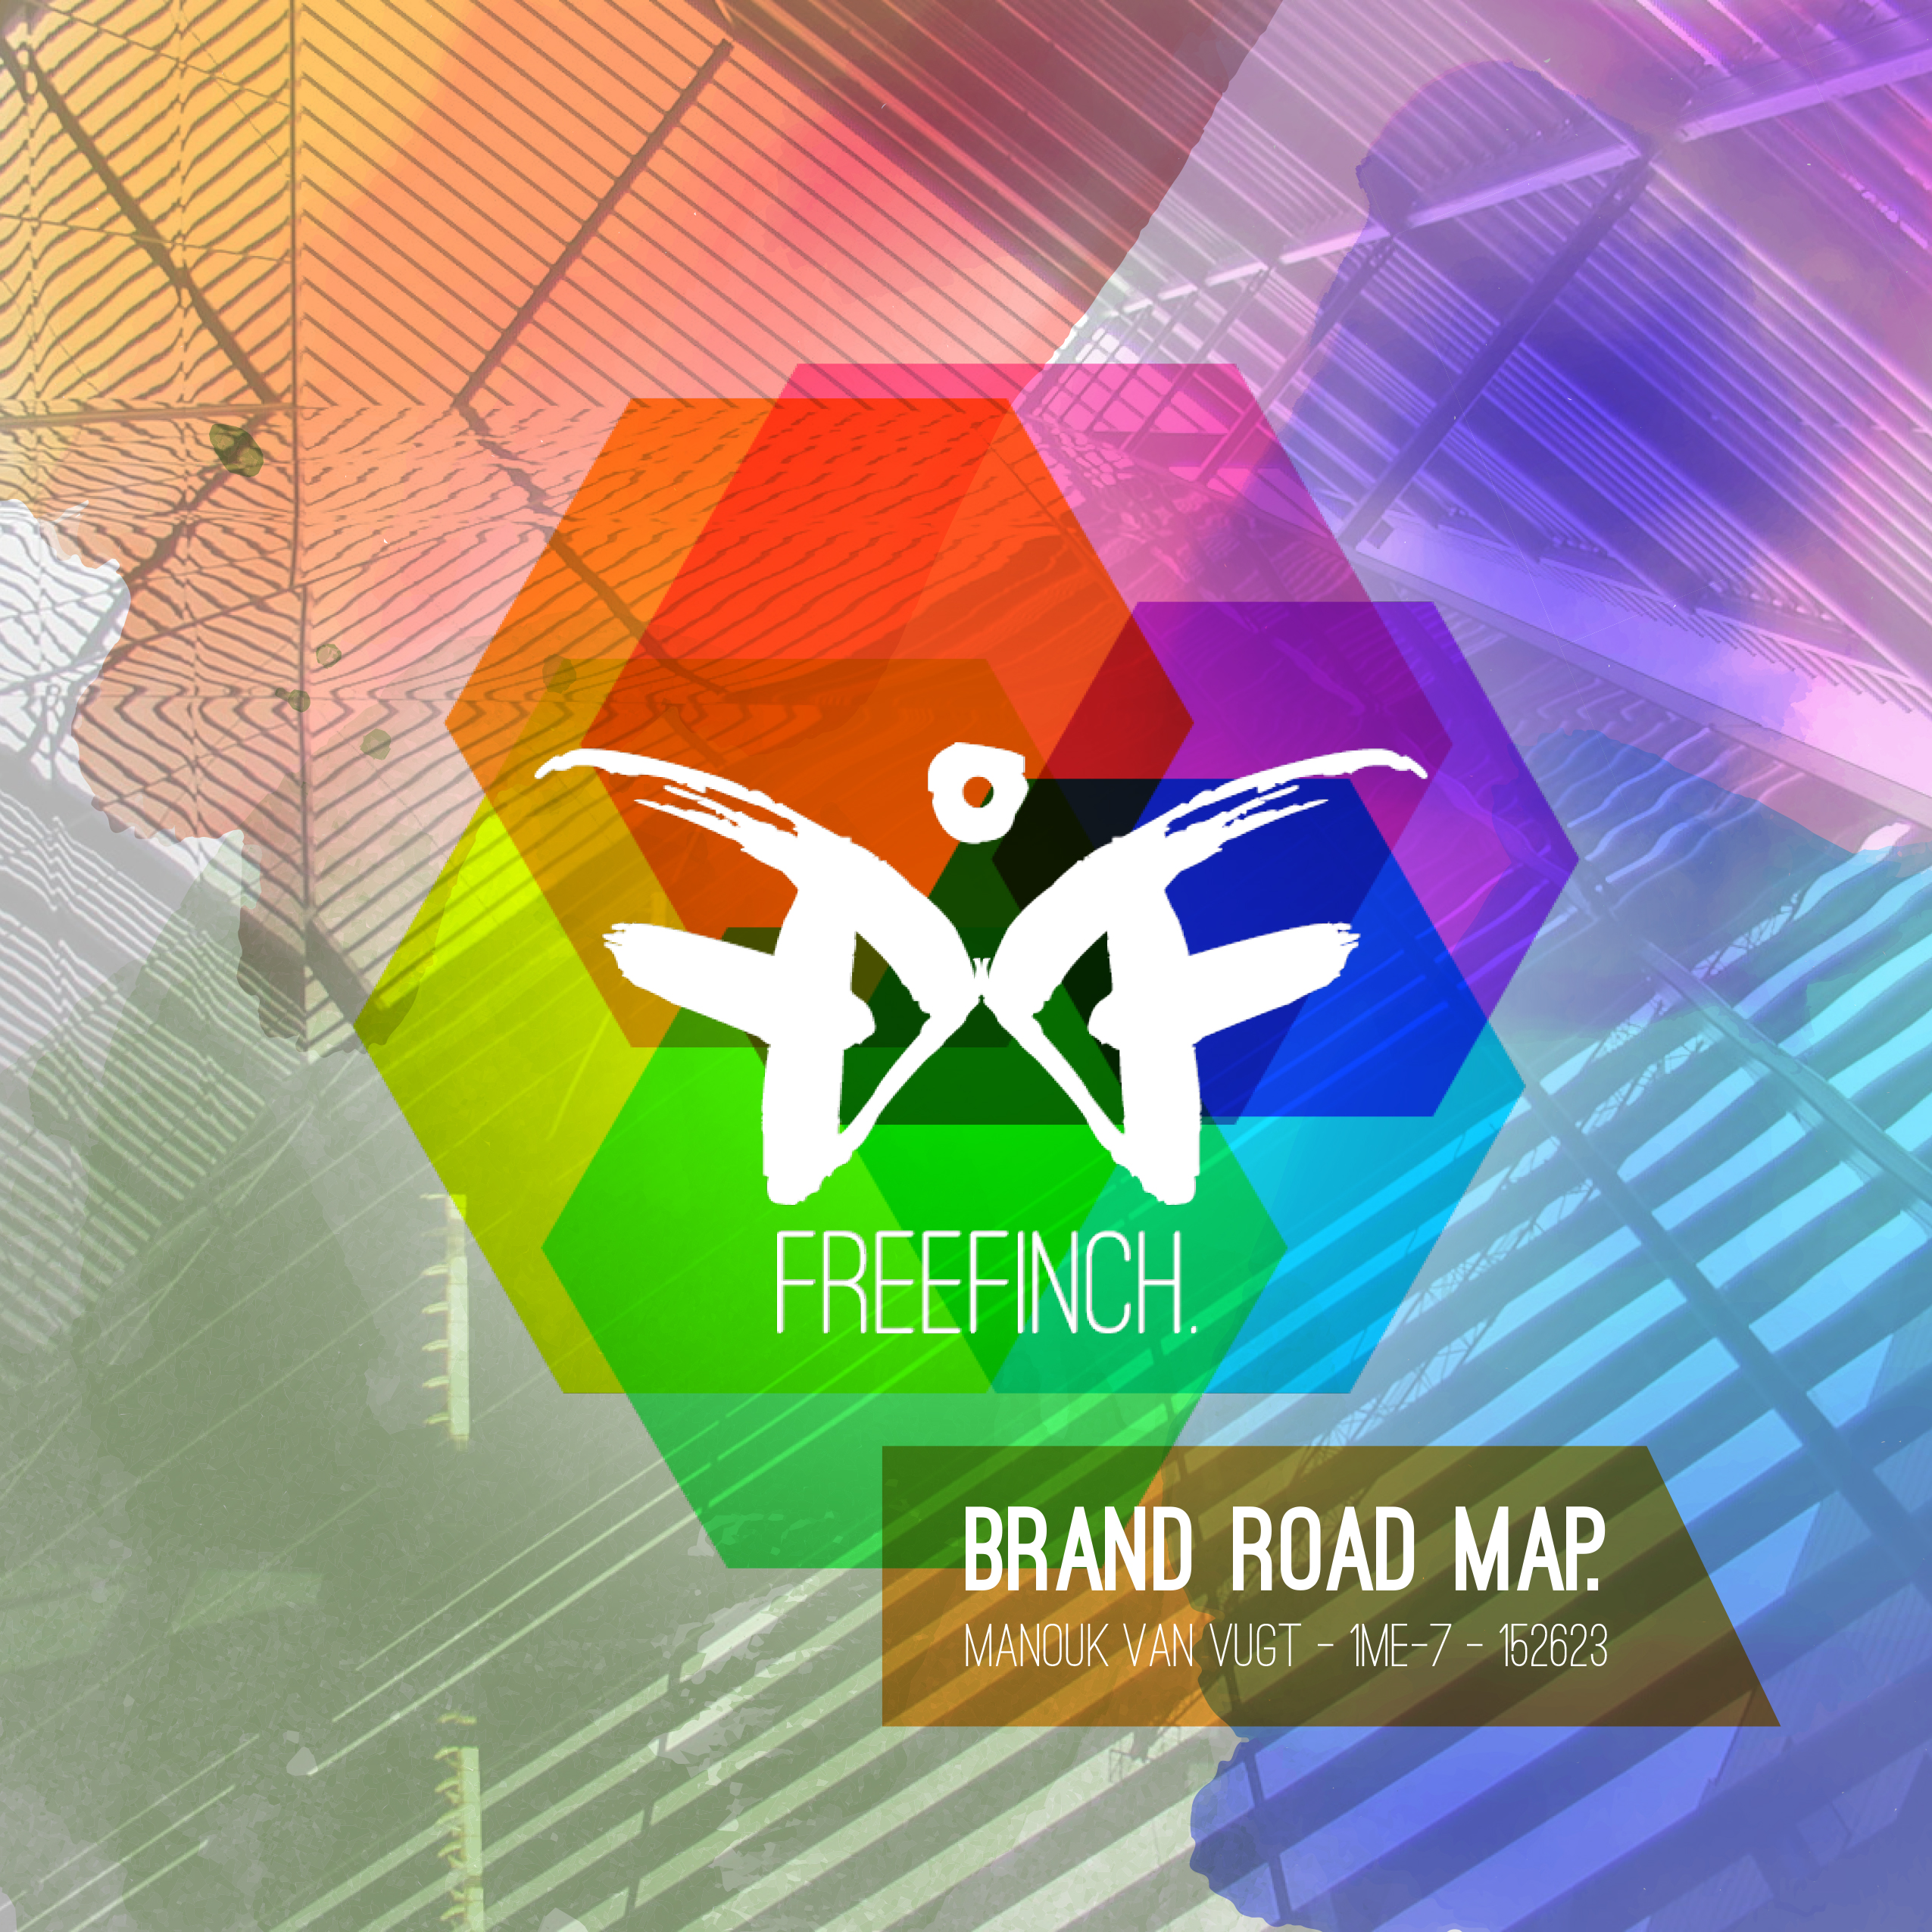 Brand-Road-Map-1